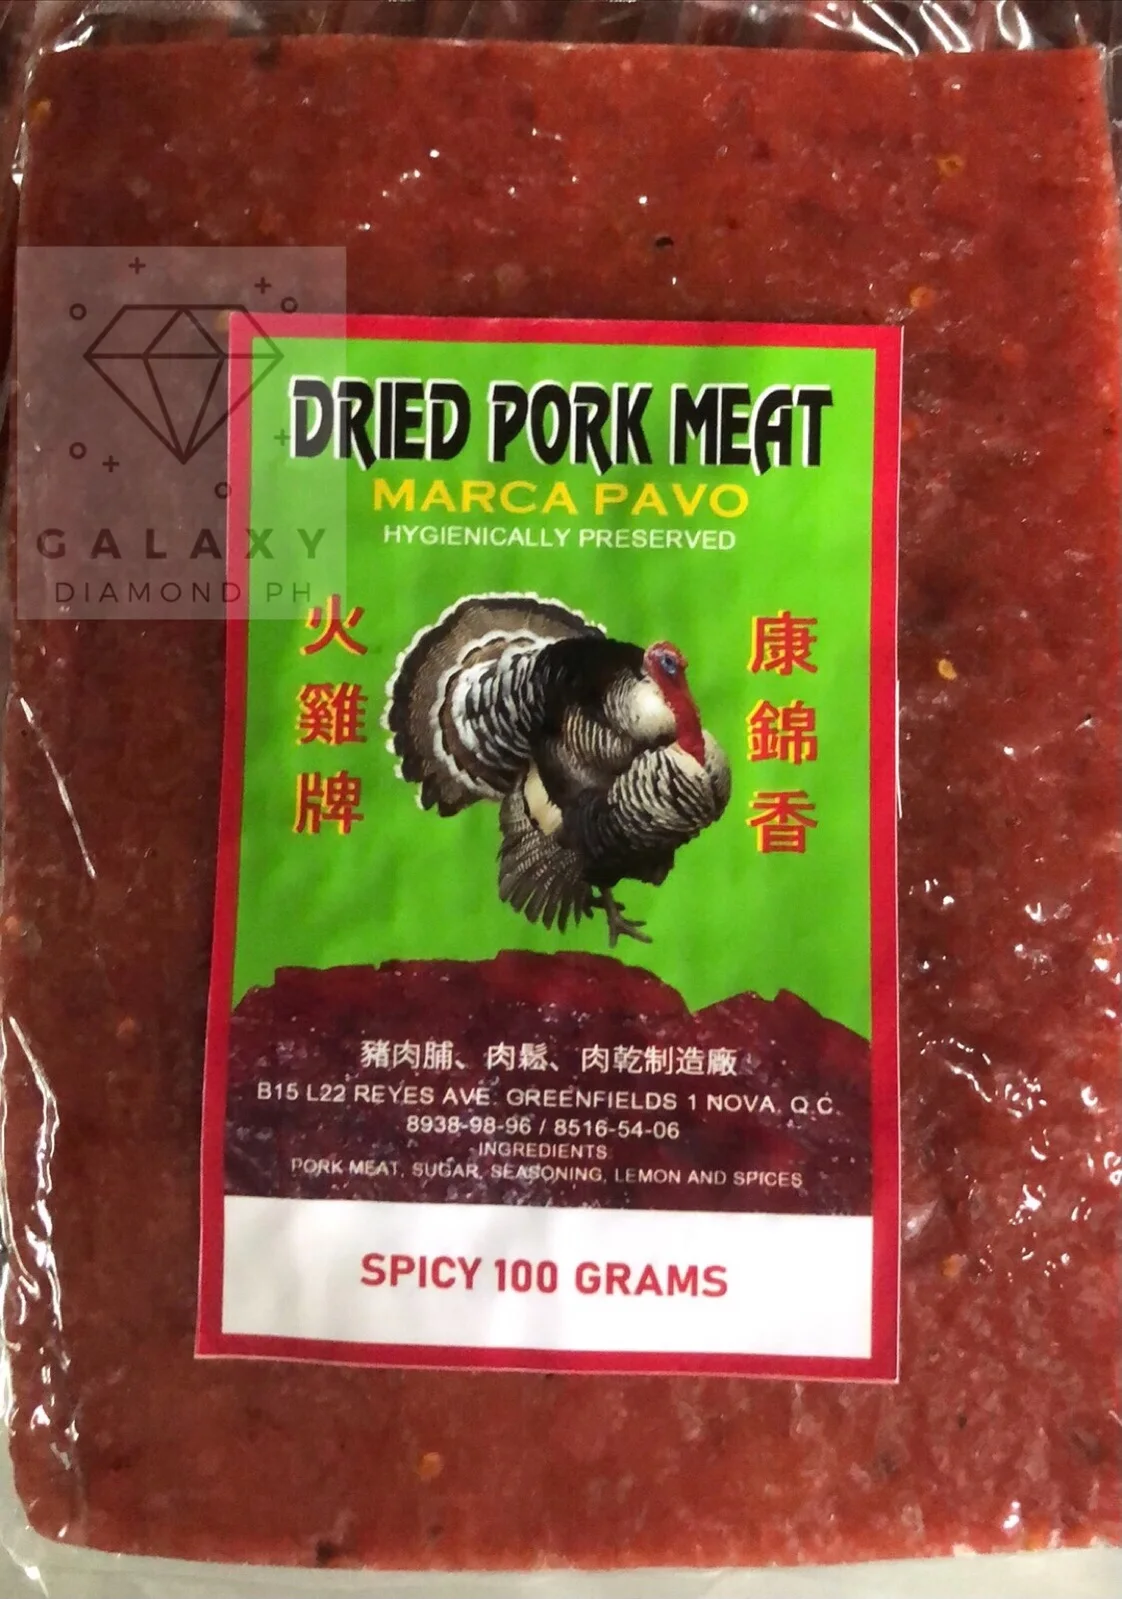 Smoked Sweet and Spicy Dry Barbecue Pork Jerky 肉干 Marca Pavo Dried Pork Meat Tapa Jerky Bak Kwa Mah Pa BBQ 100 grams Chinese Snack Ready to Eat